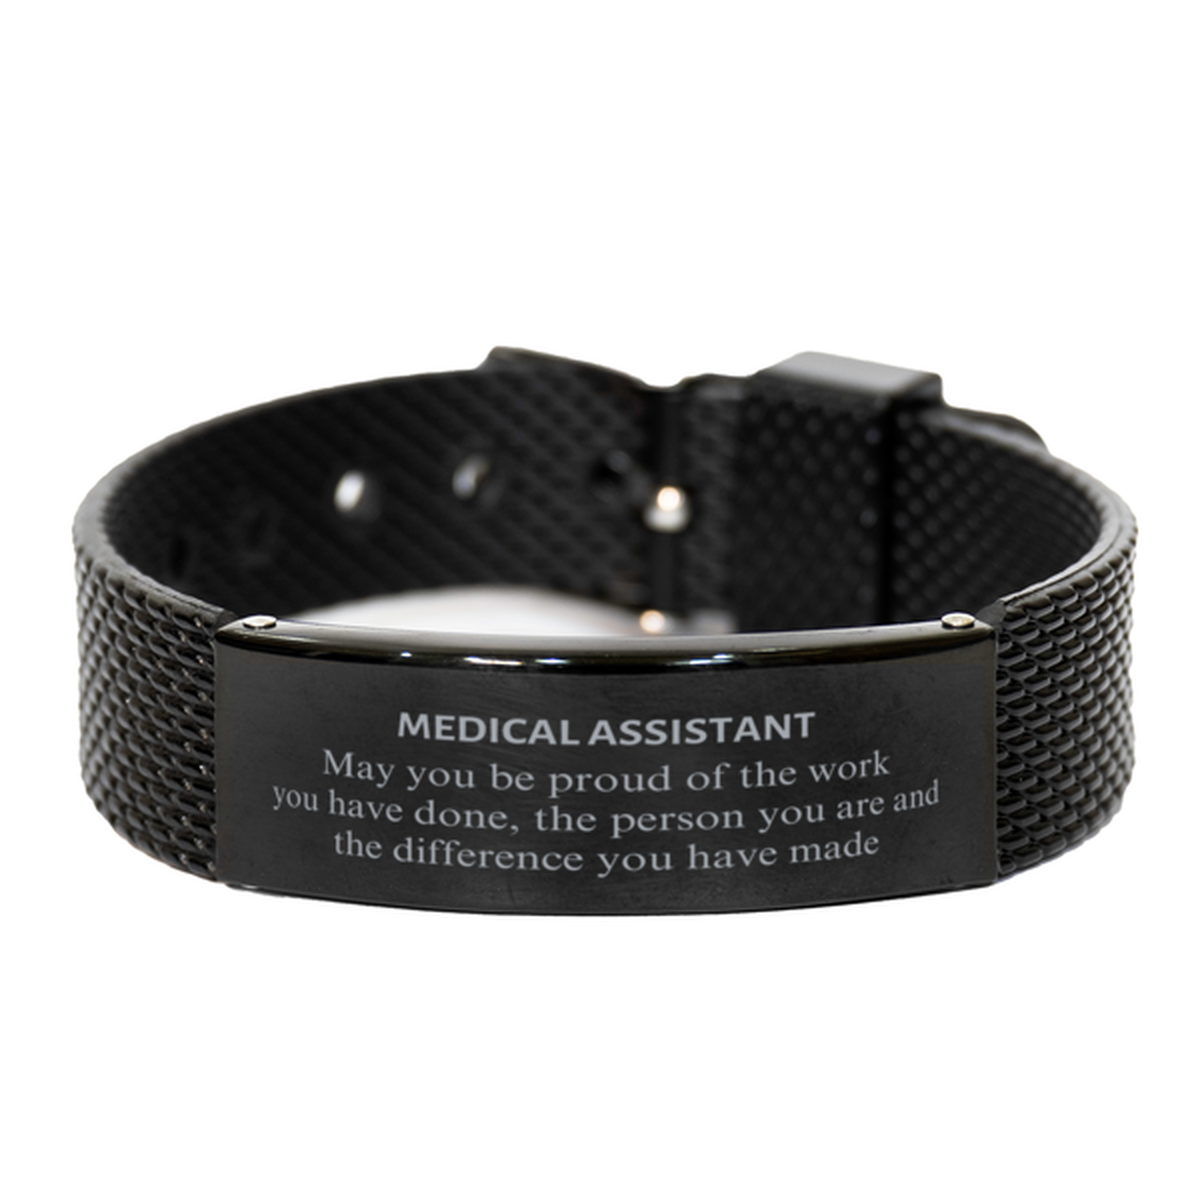 Medical Assistant May you be proud of the work you have done, Retirement Medical Assistant Black Shark Mesh Bracelet for Colleague Appreciation Gifts Amazing for Medical Assistant